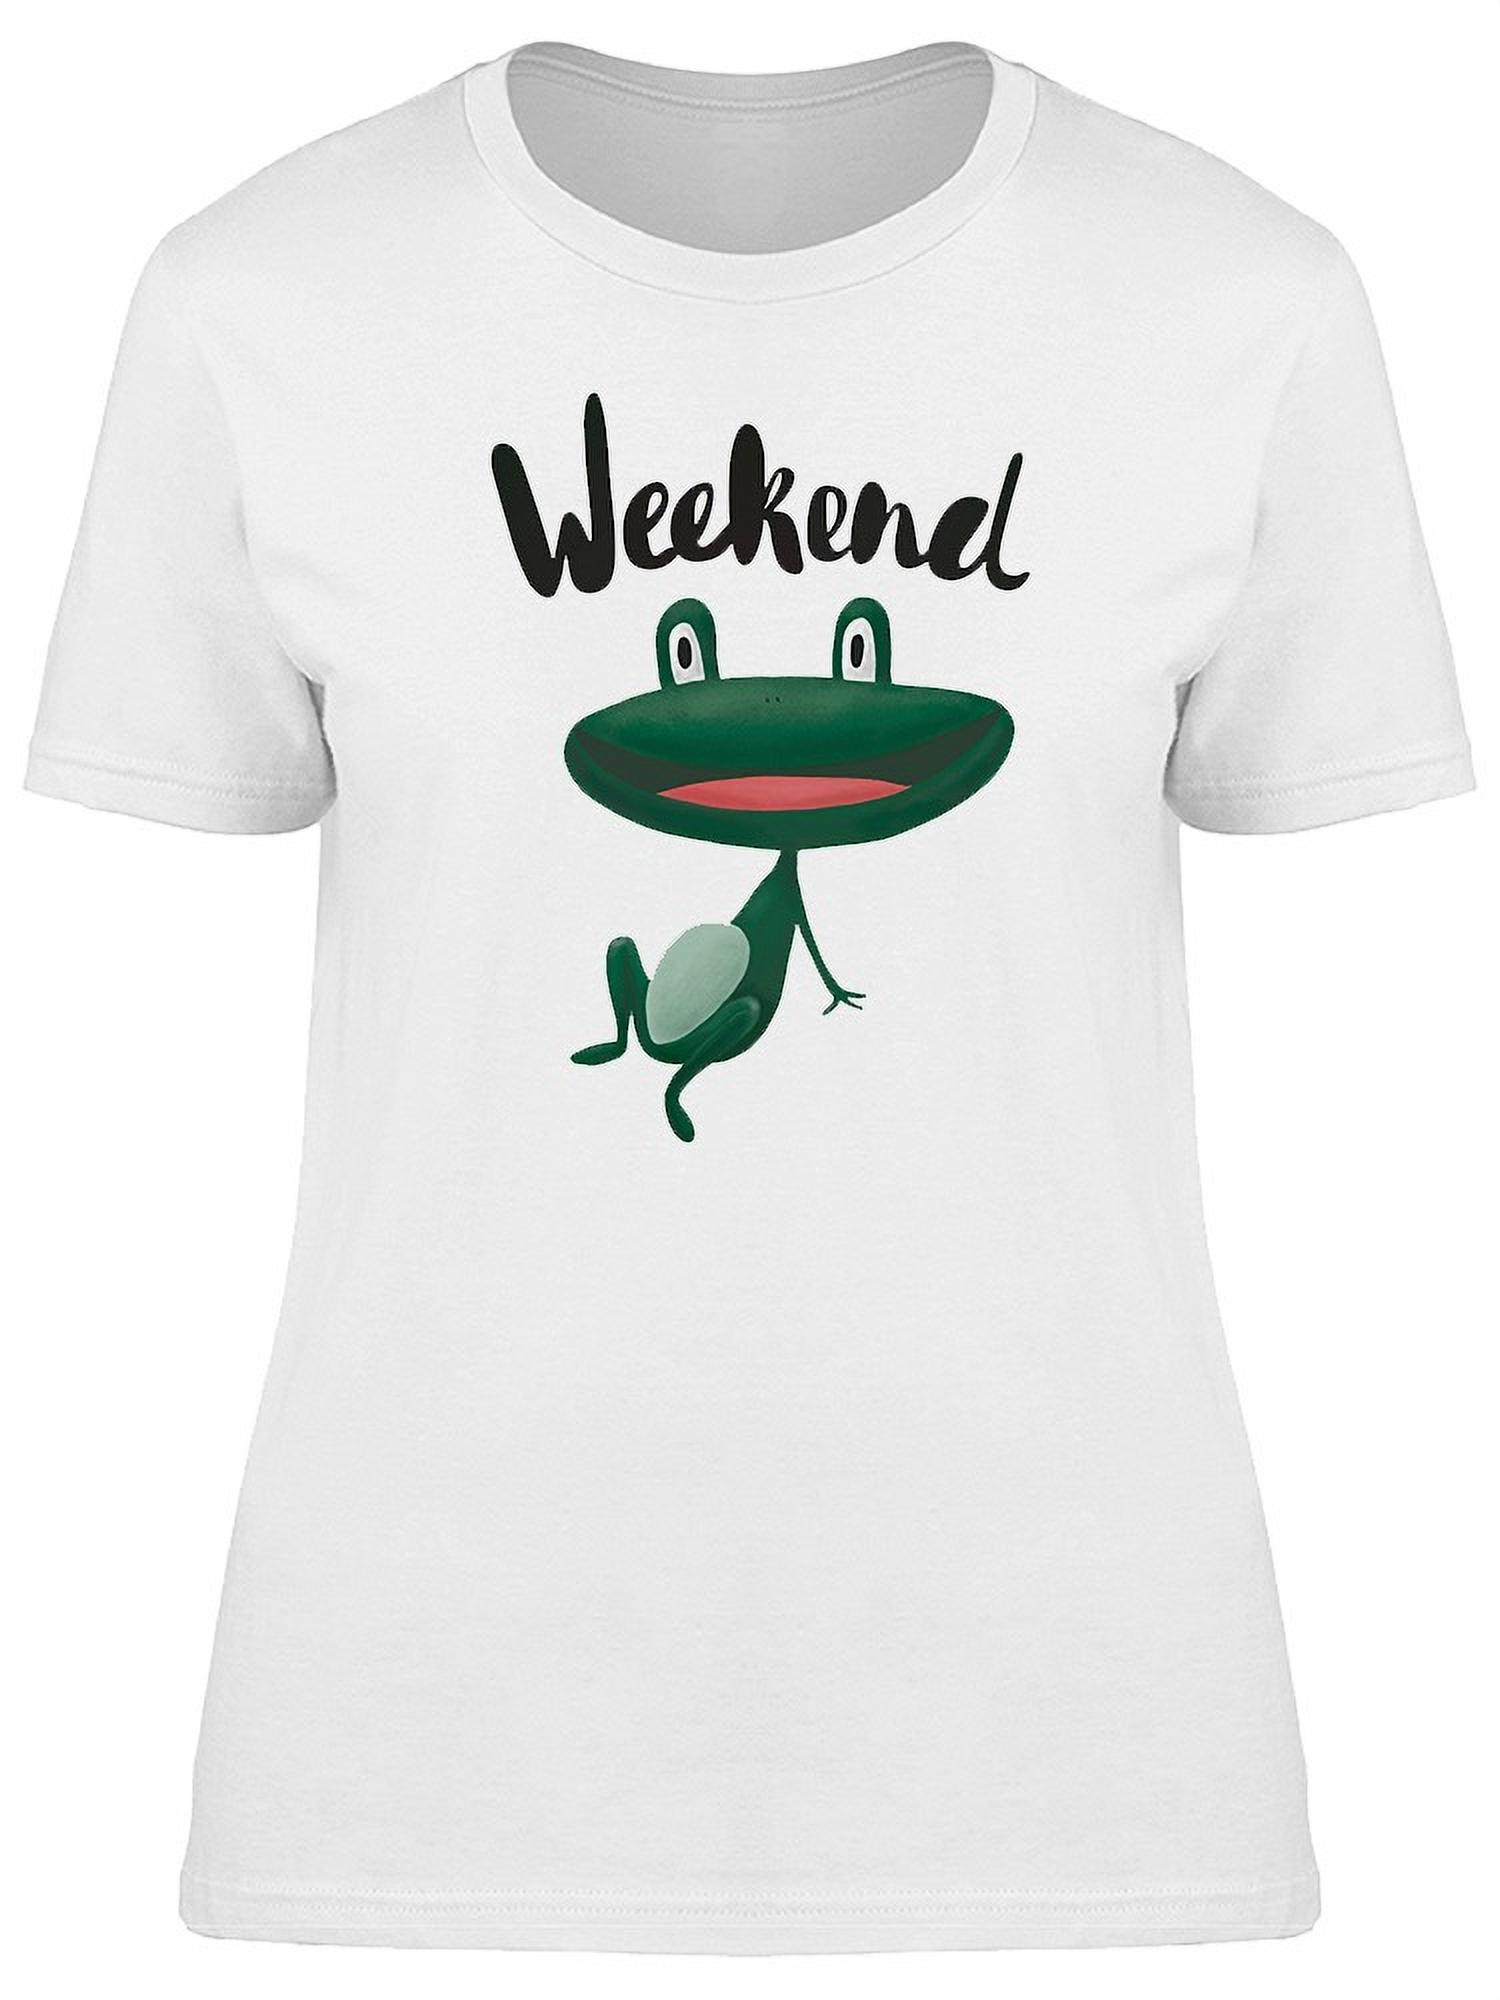 Weekend Happy Frog T-Shirt Women -Image by Shutterstock, Female x-Large - image 1 of 2